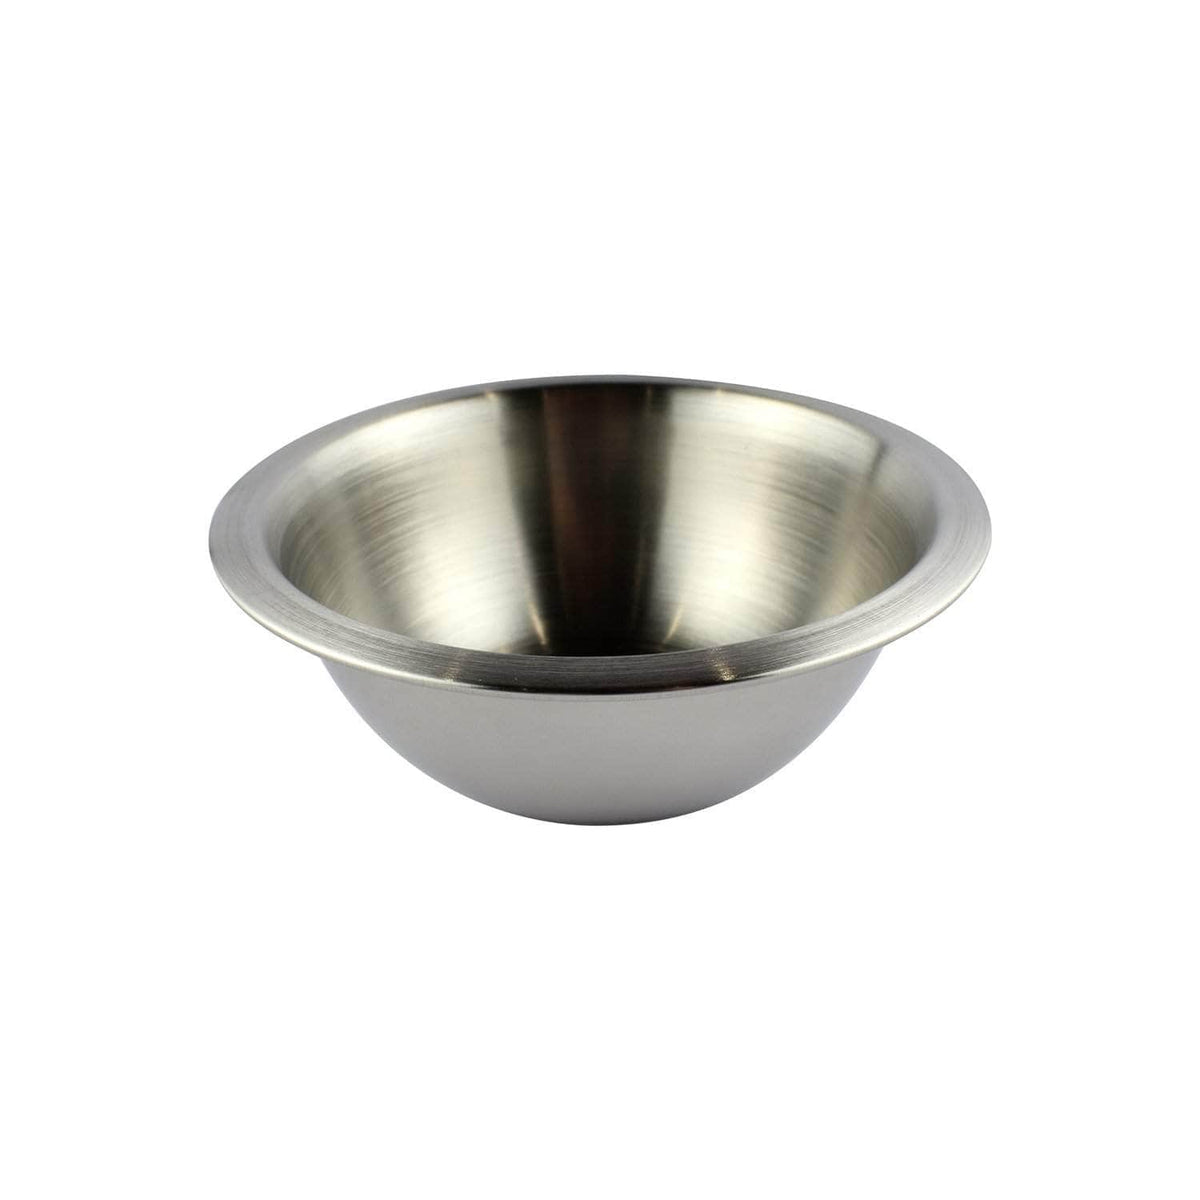 Stainless steel mixing bowl 0.5 litre